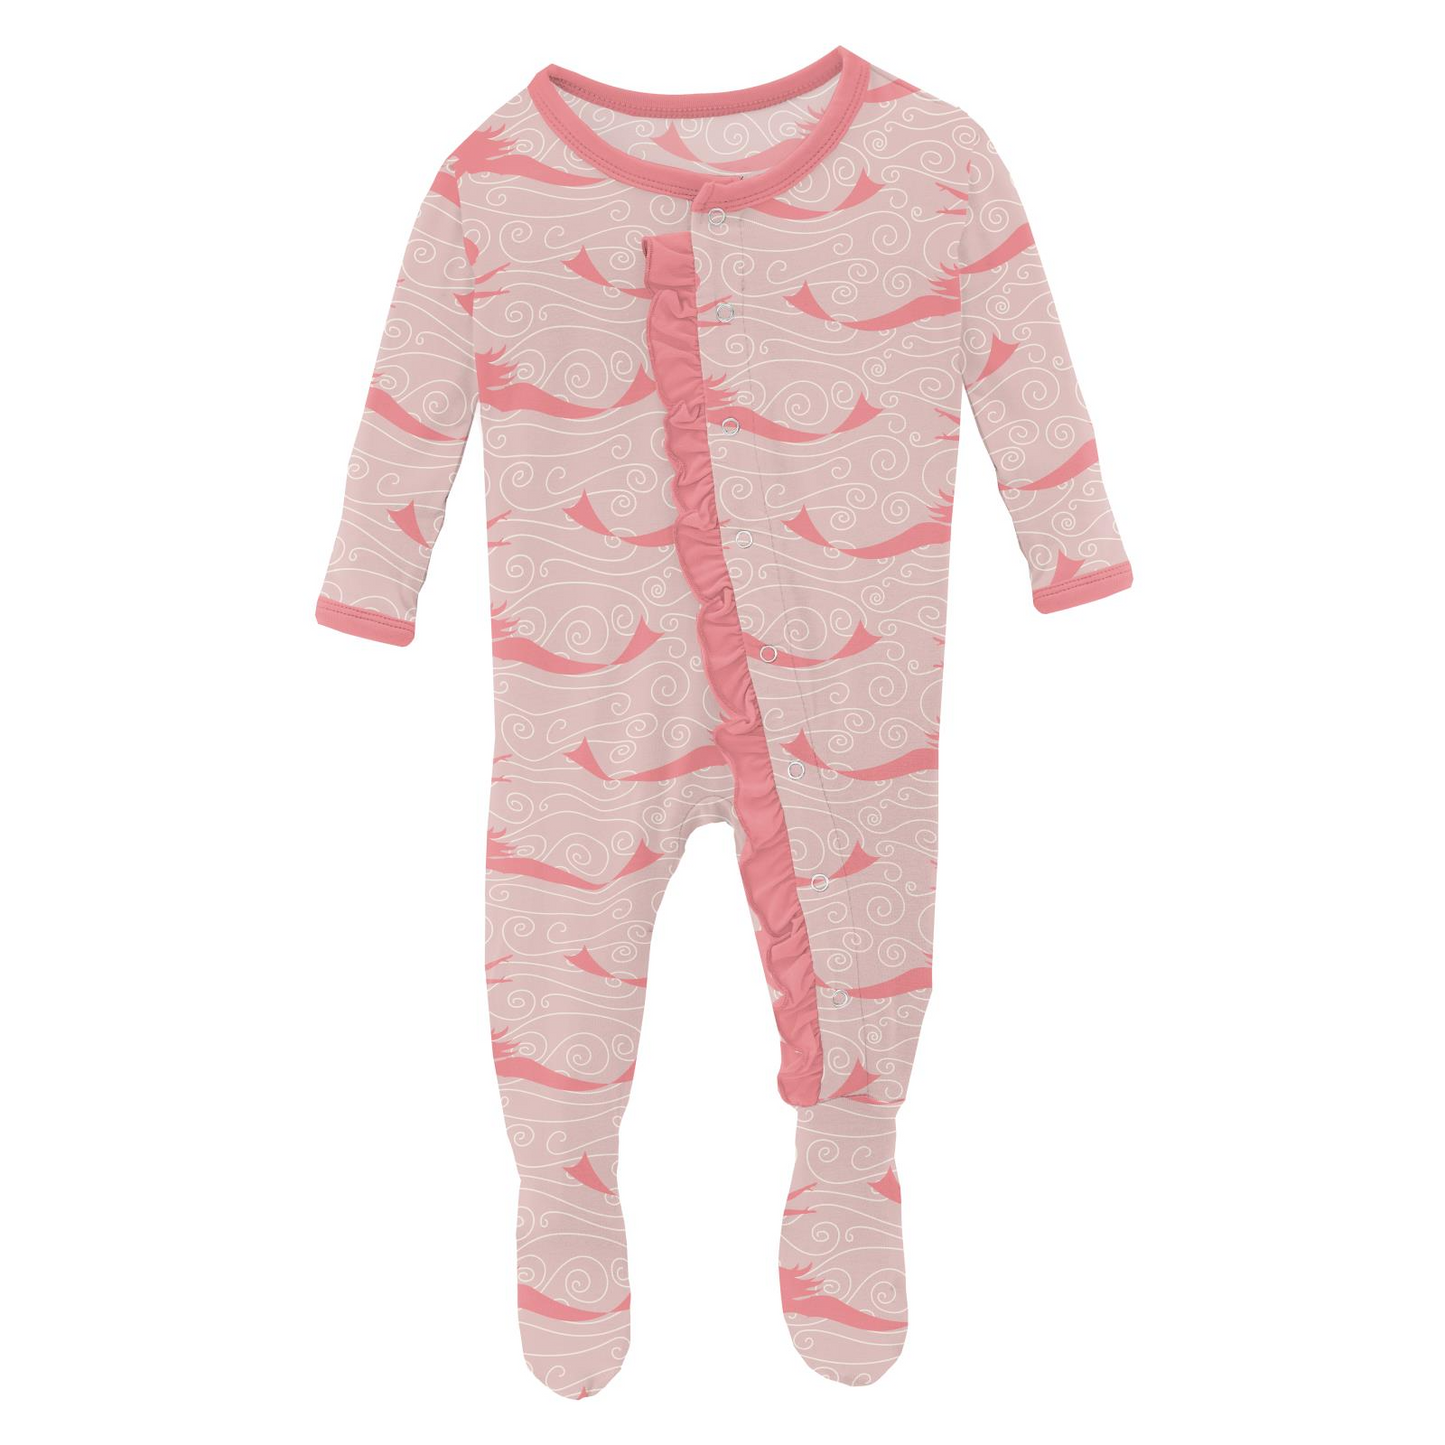 Print Classic Ruffle Footie with Snaps: Baby Rose Mermaid